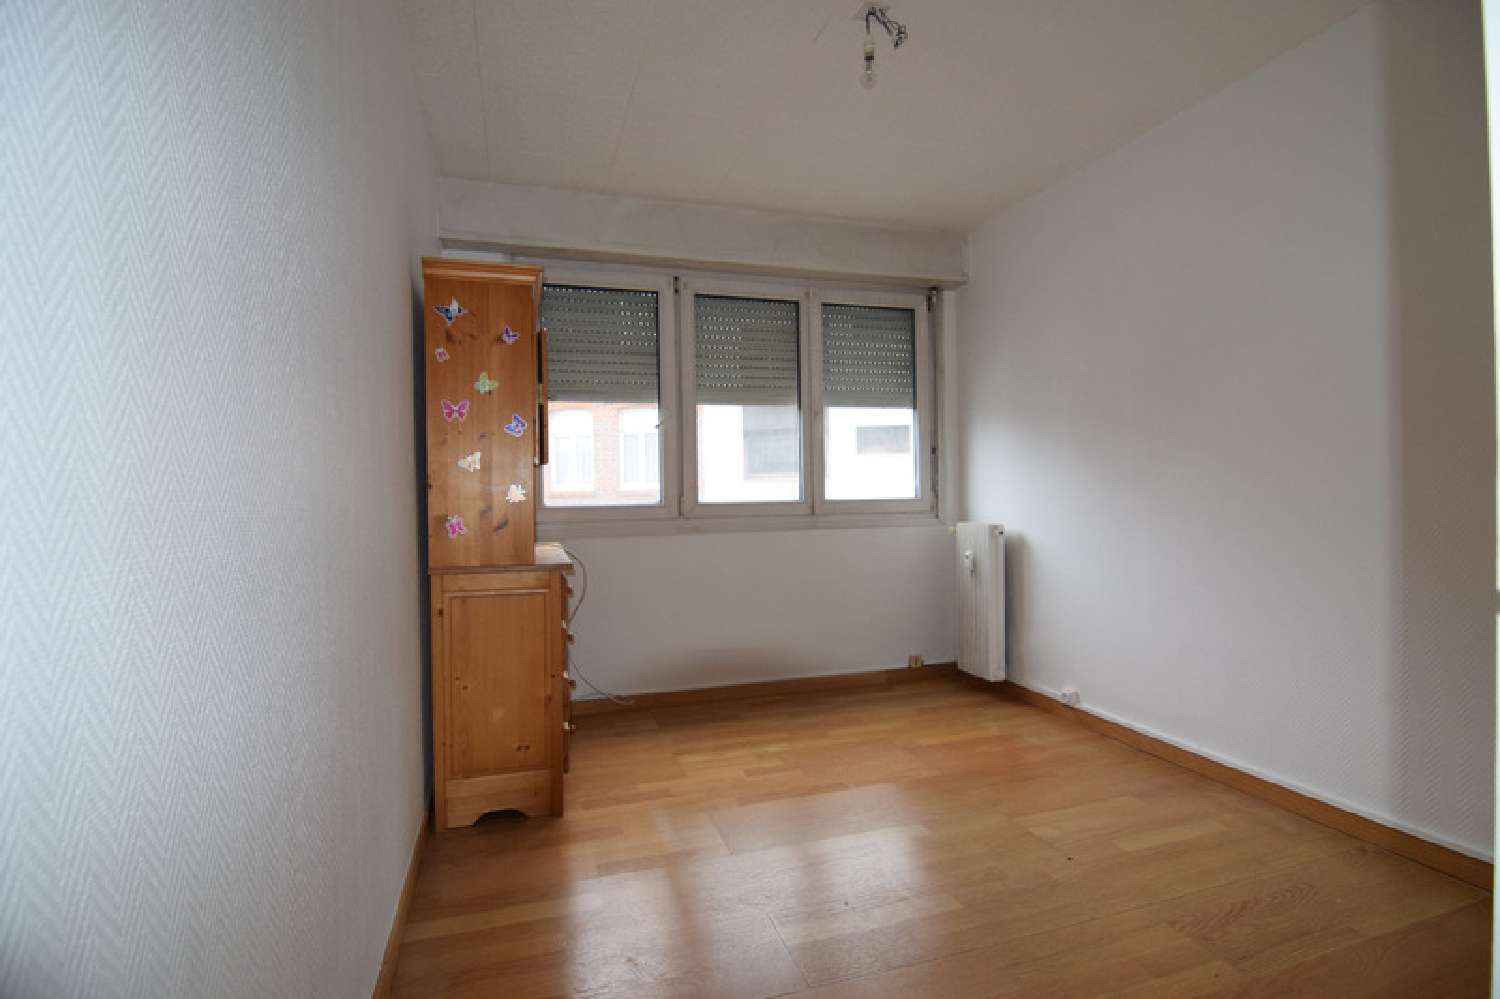  à vendre appartement Fâches-Thumesnil Nord 7